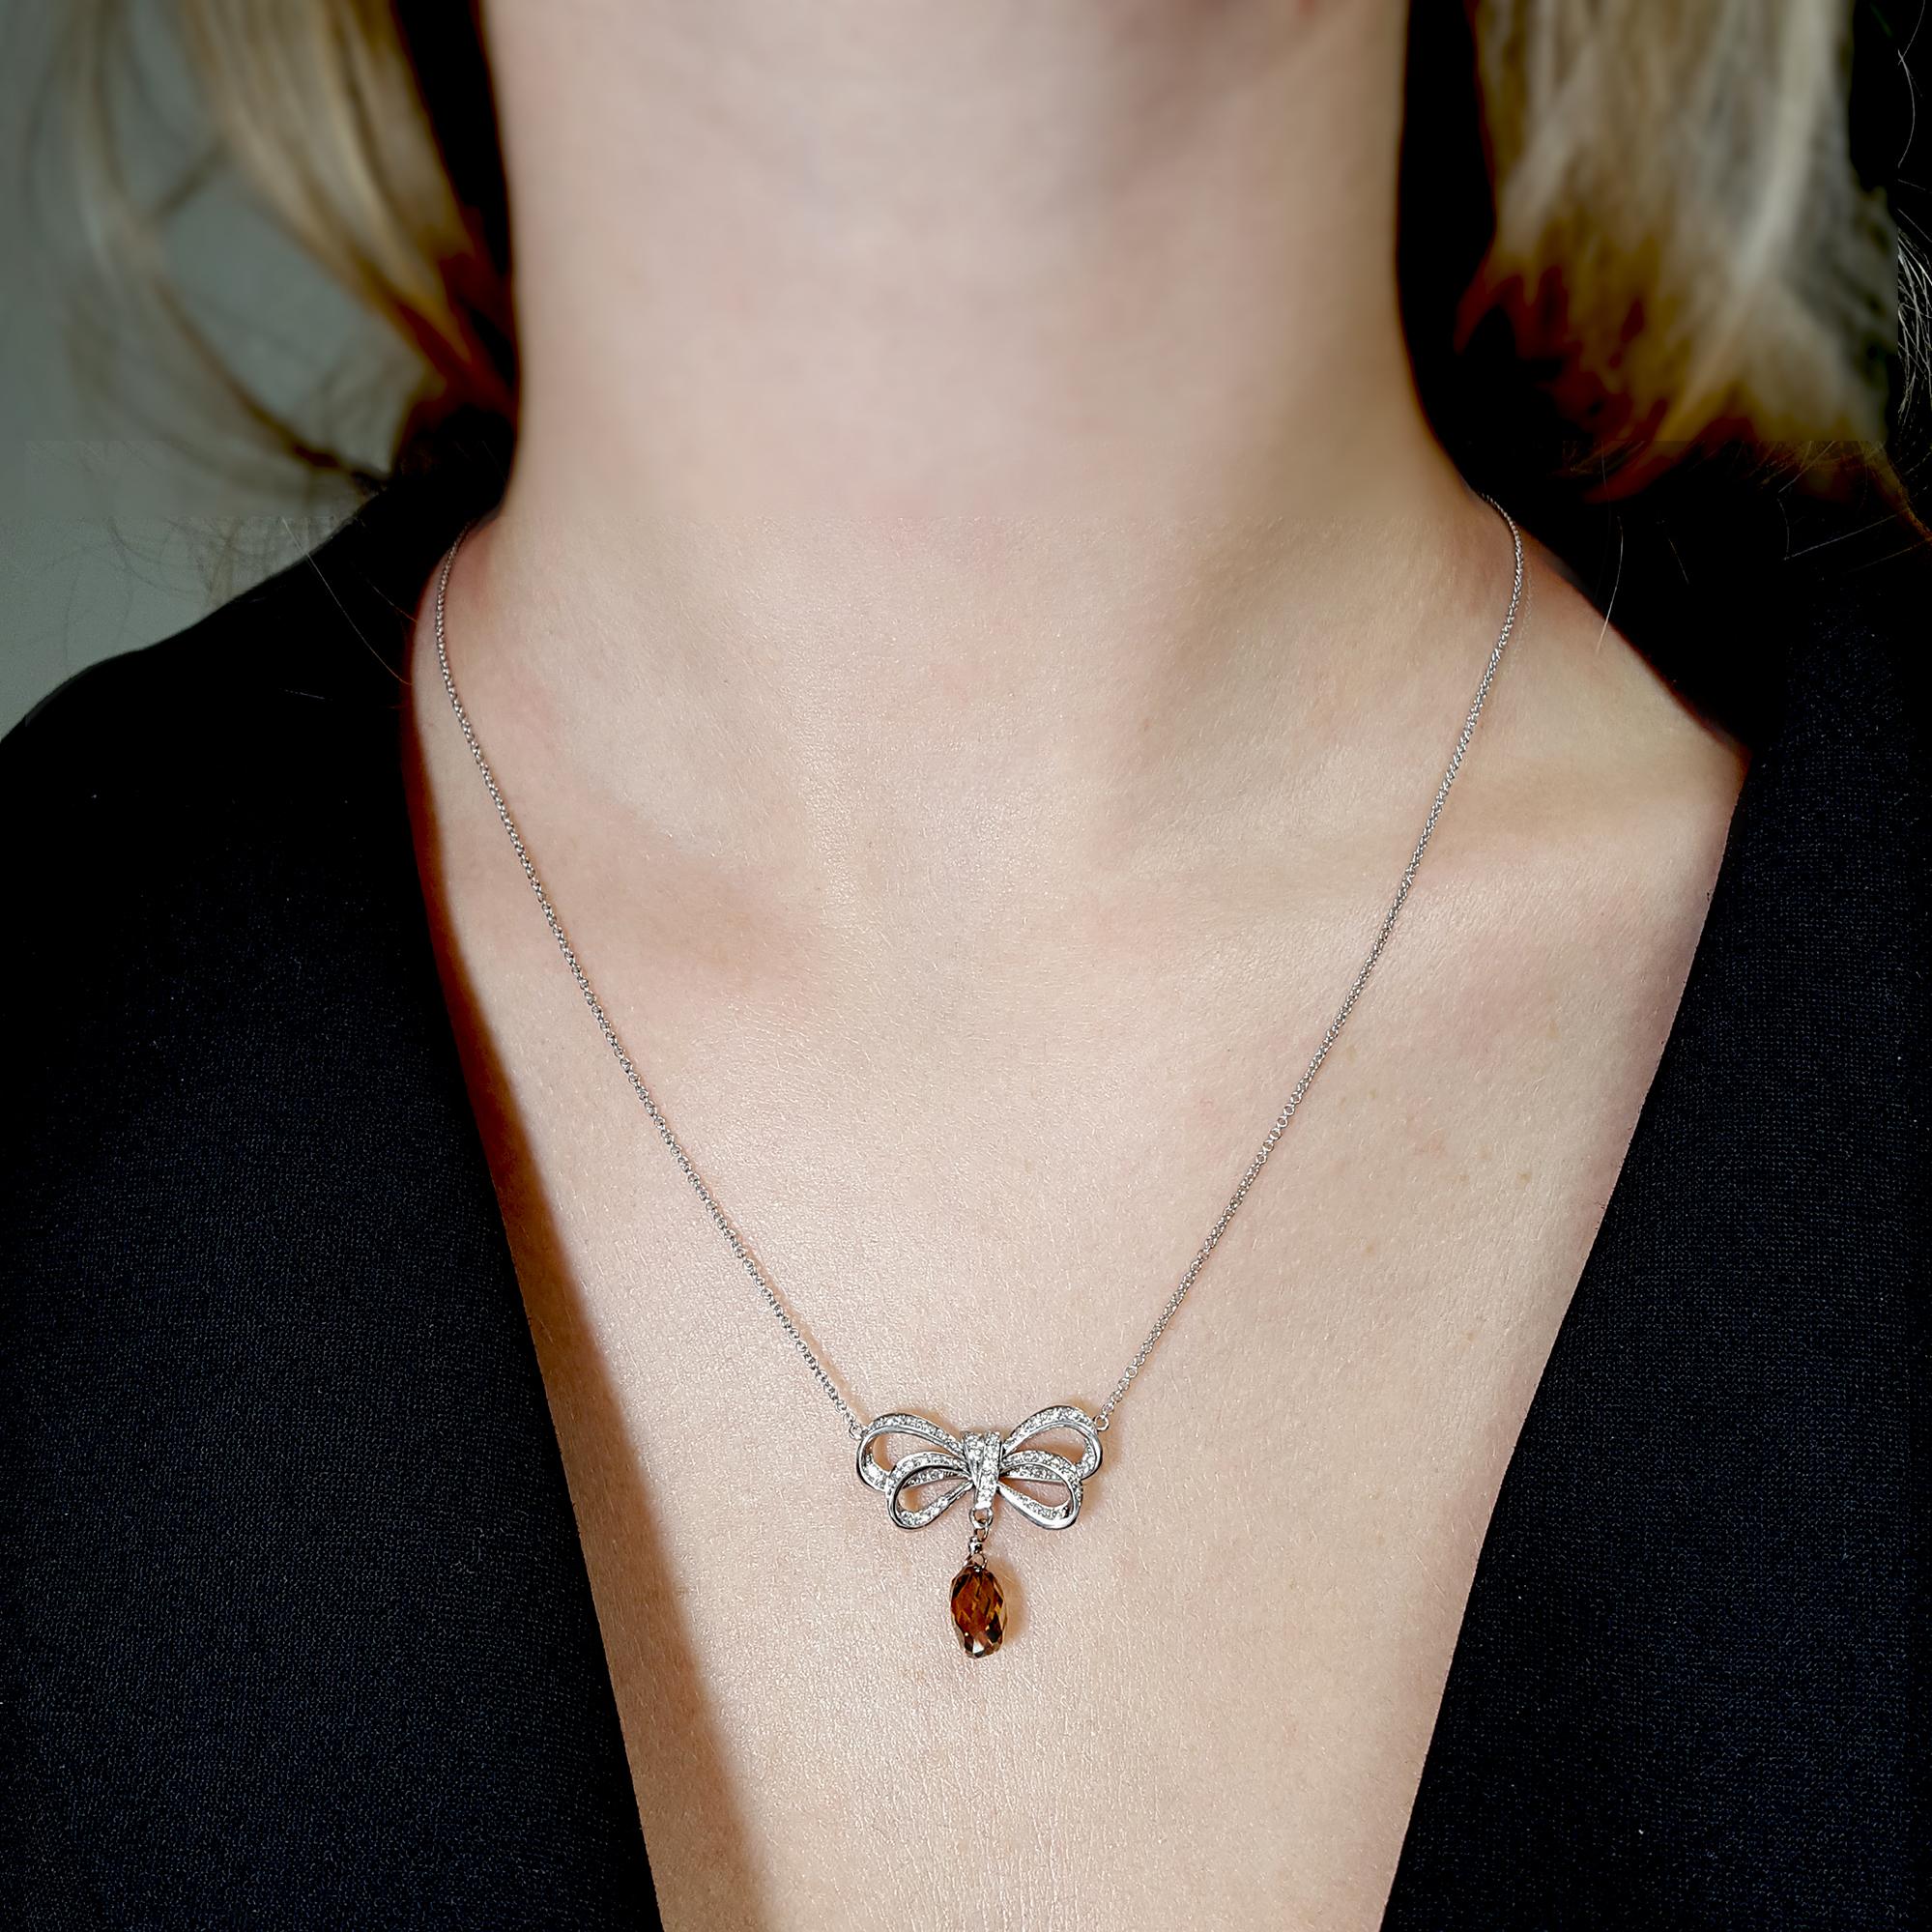 Introducing a captivating pendant necklace featuring a bow-inspired open-style design, adorned with a central 2.21-carat Briolette-cut Fancy Dark Orangy Brown diamond certified by GIA. This remarkable centerpiece is encircled by 51 round brilliant